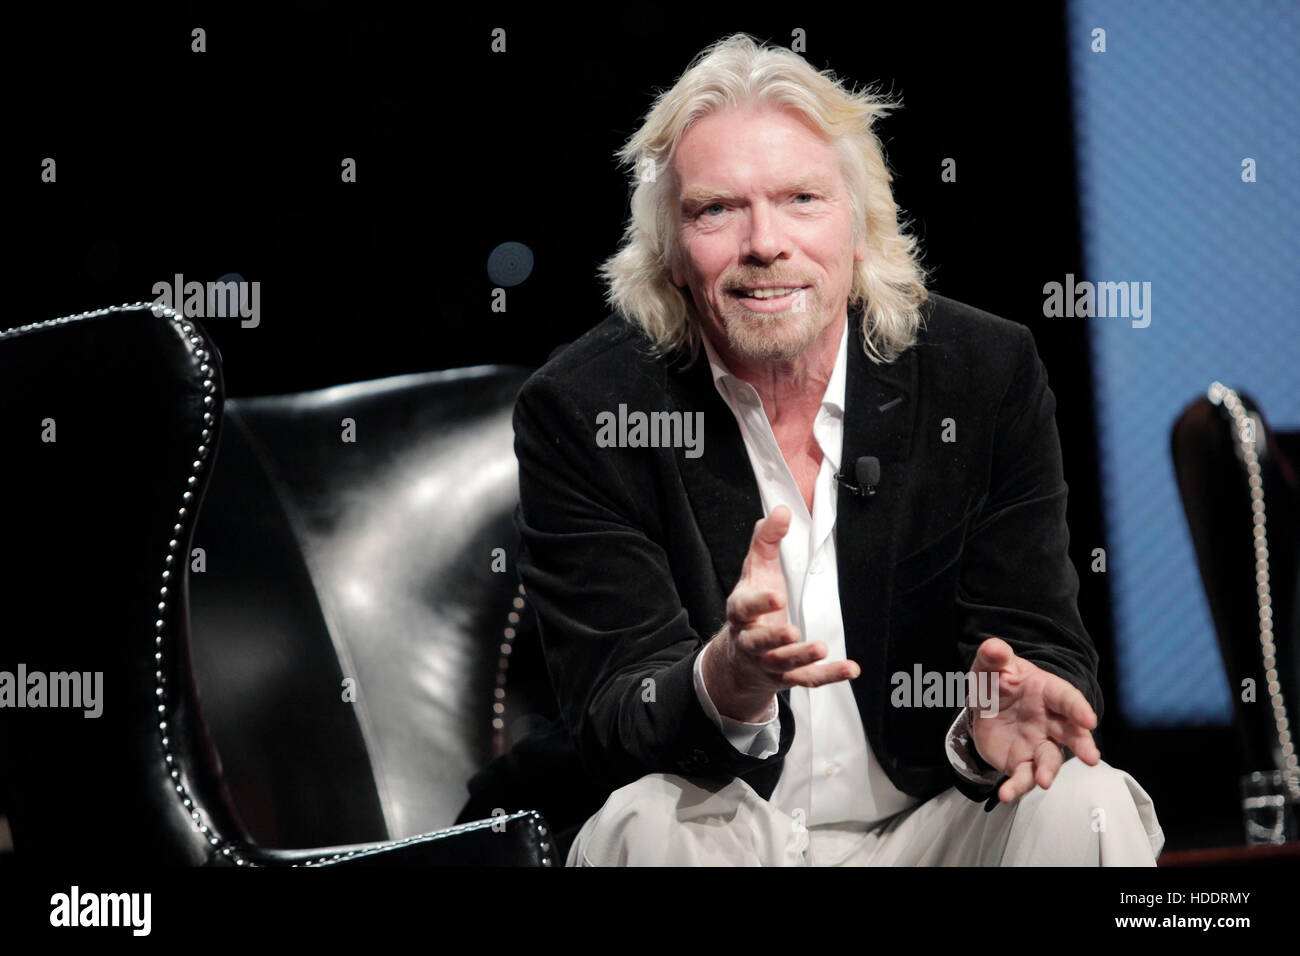 Richard Branson, founder and chairman of Virgin Group Ltd., speaks during the 2010 Ernst & Young Strategic Growth Forum in Palm Desert, California, on November 11, 2010.  Photo by Francis Specker Stock Photo